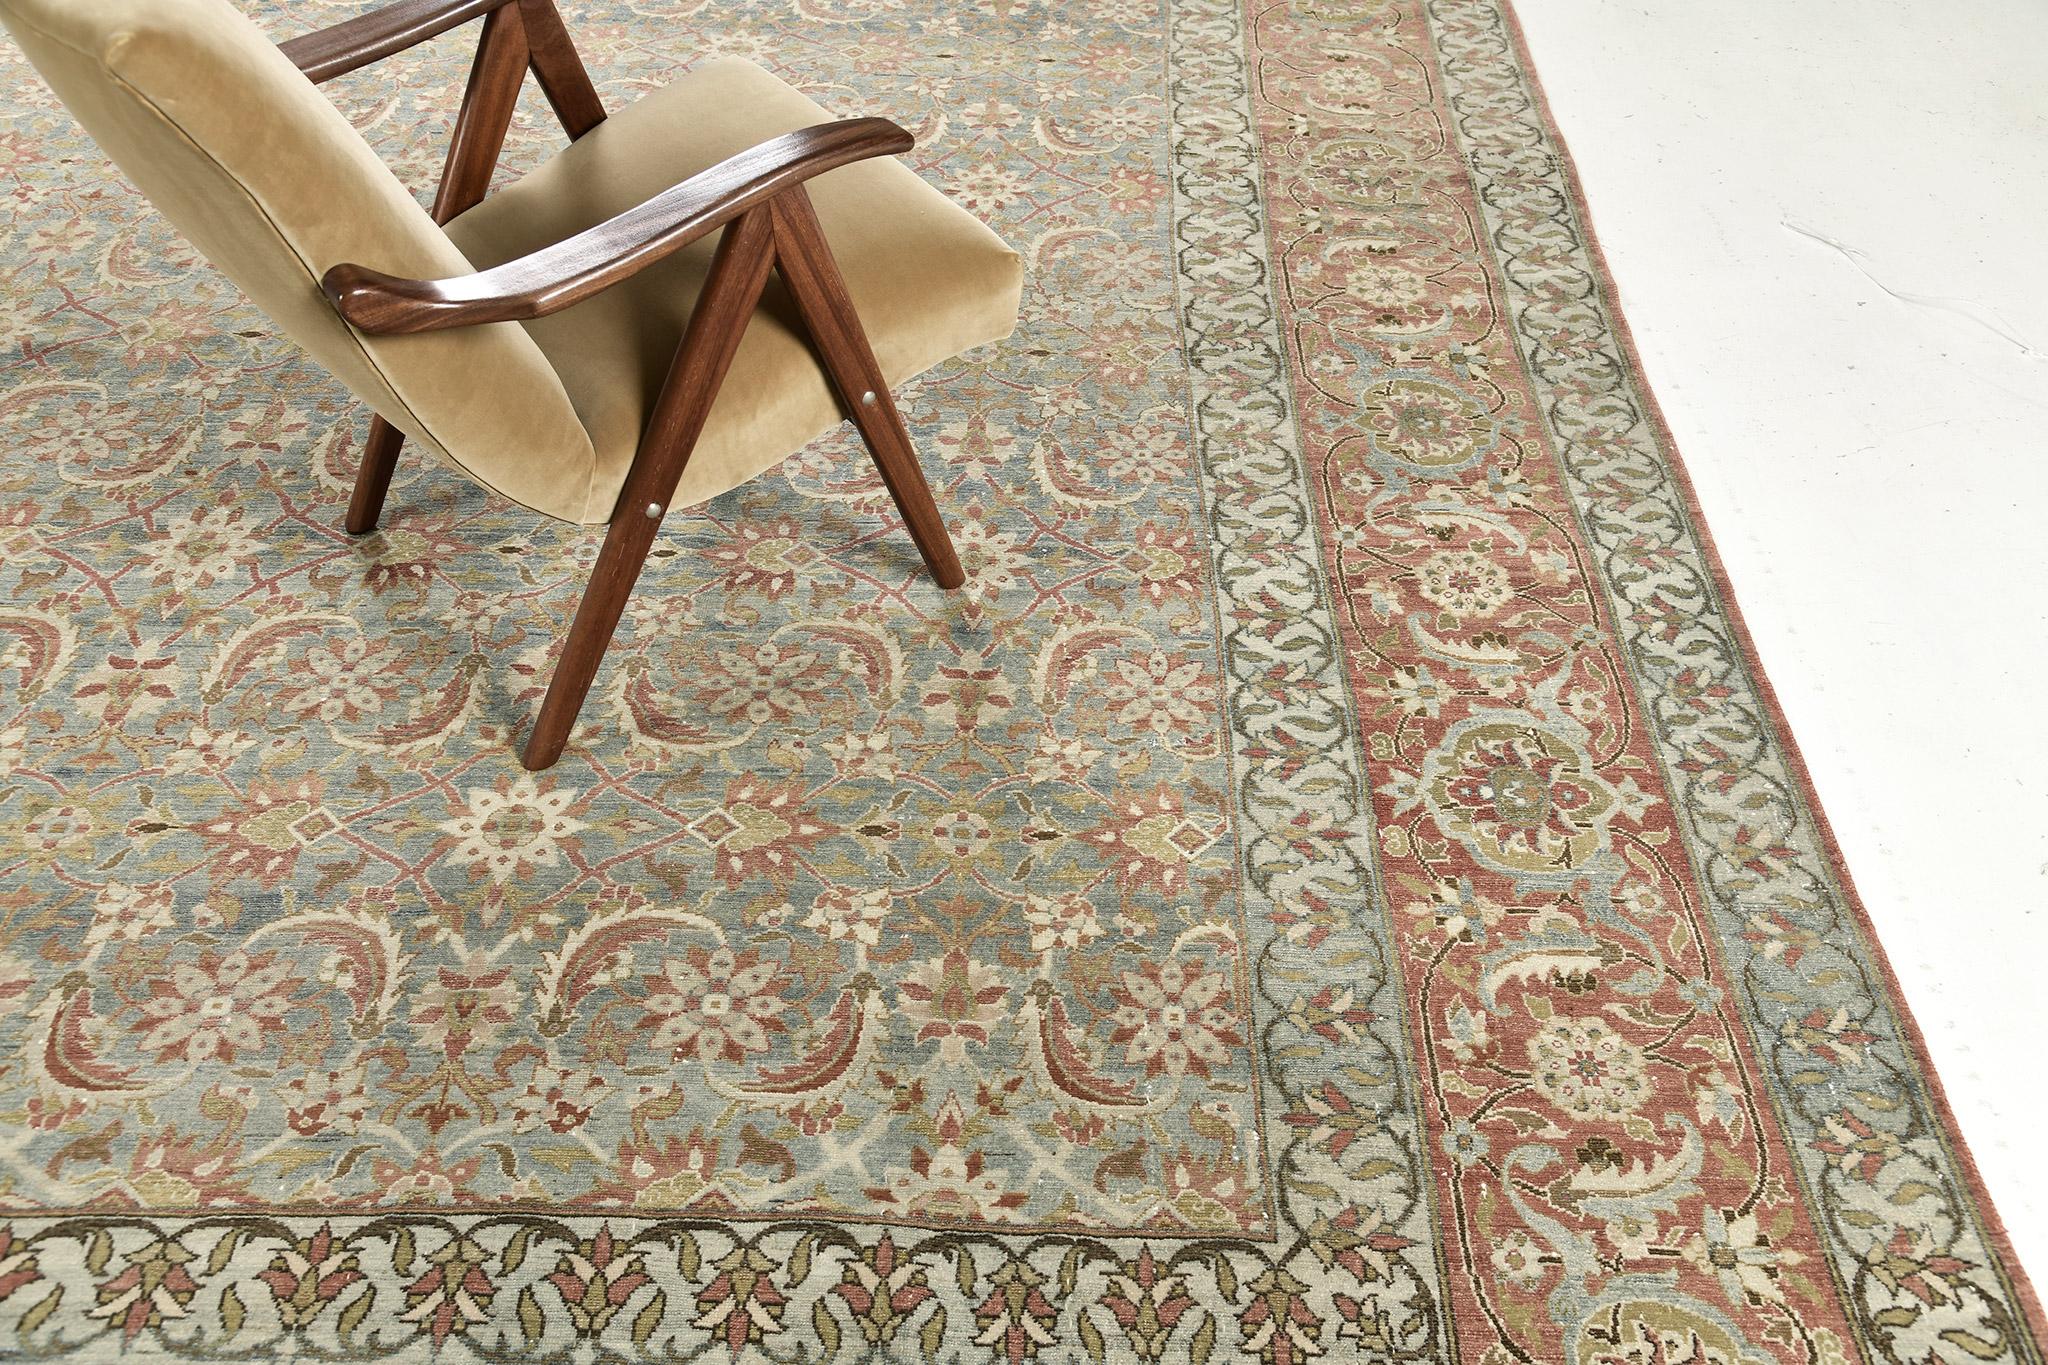 An impressive artwork of Bakhtiari Rug flexed its hand-spun wool for durability and individuality. Stunning warm earth-toned schemes are featured that will match your traditional interiors. Aside from its aesthetic value, it is also perfect for your